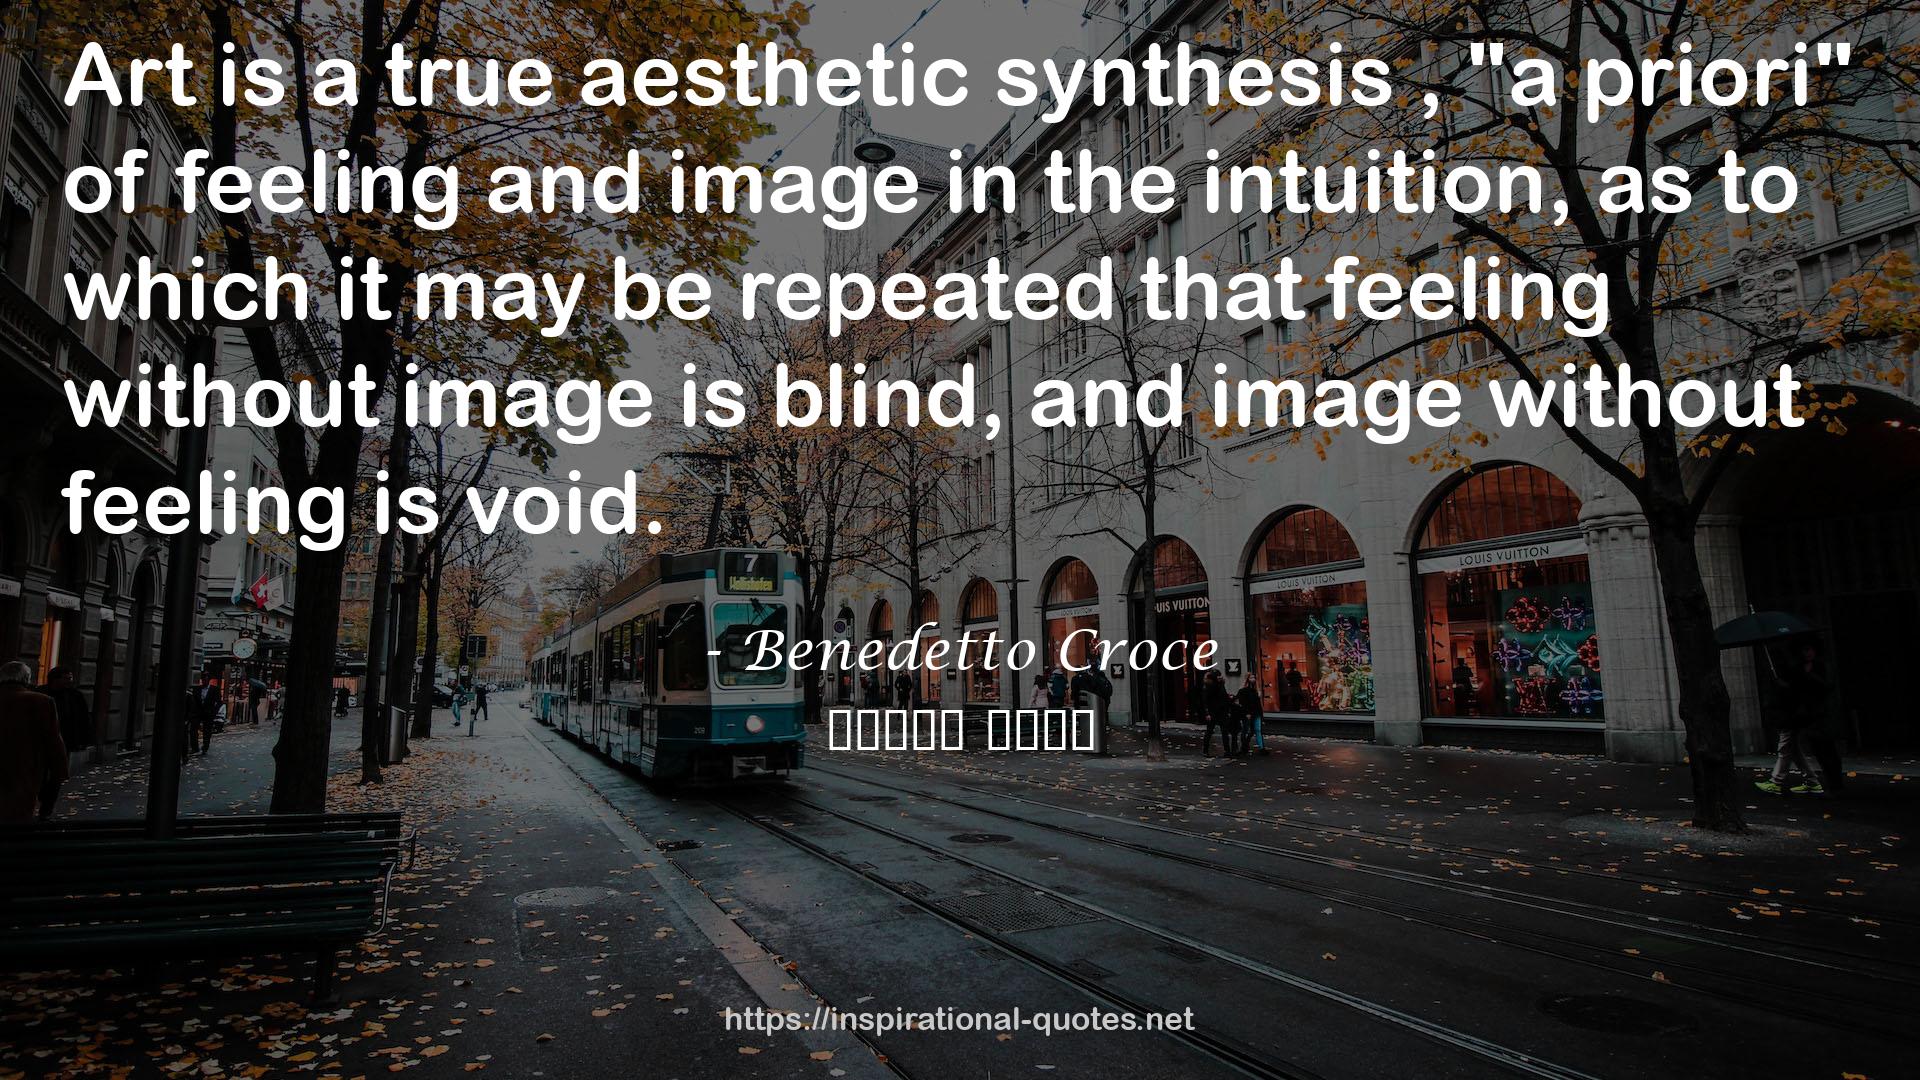 Benedetto Croce QUOTES